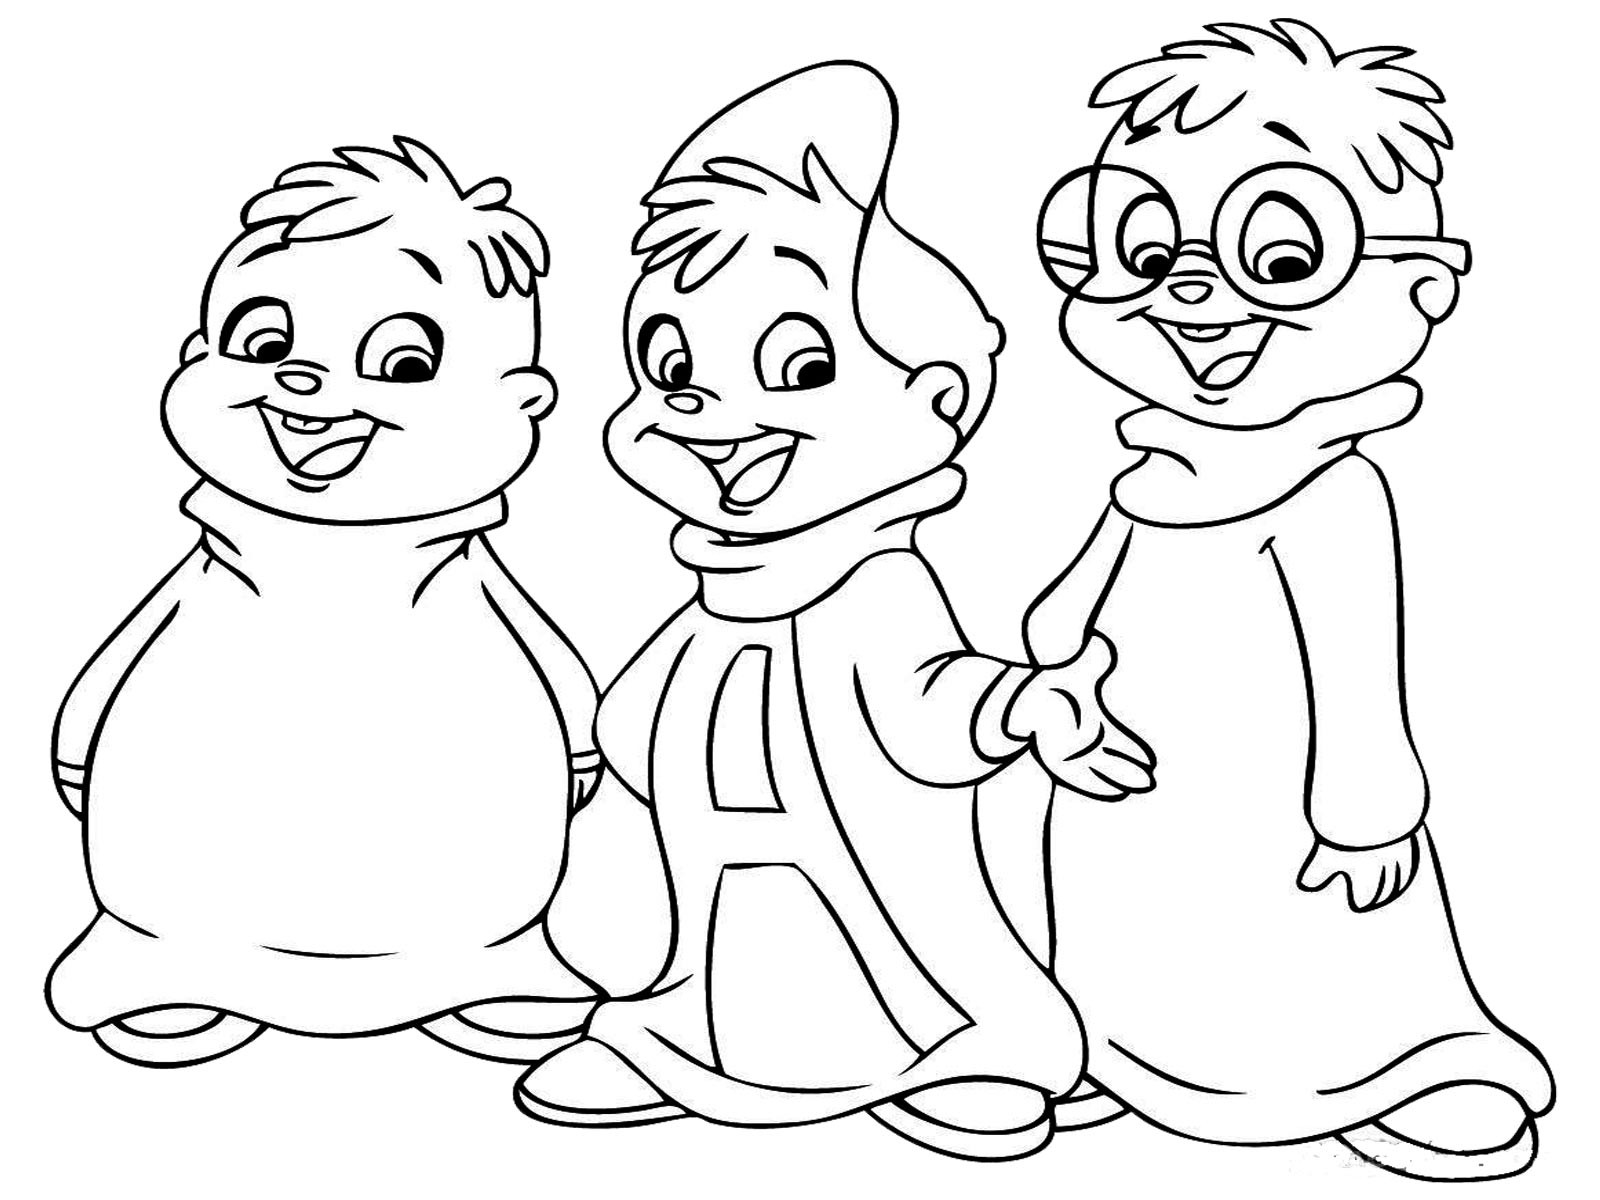 Coloring Pages For Girls And Boys
 Coloring Pages for Boys 2018 Dr Odd